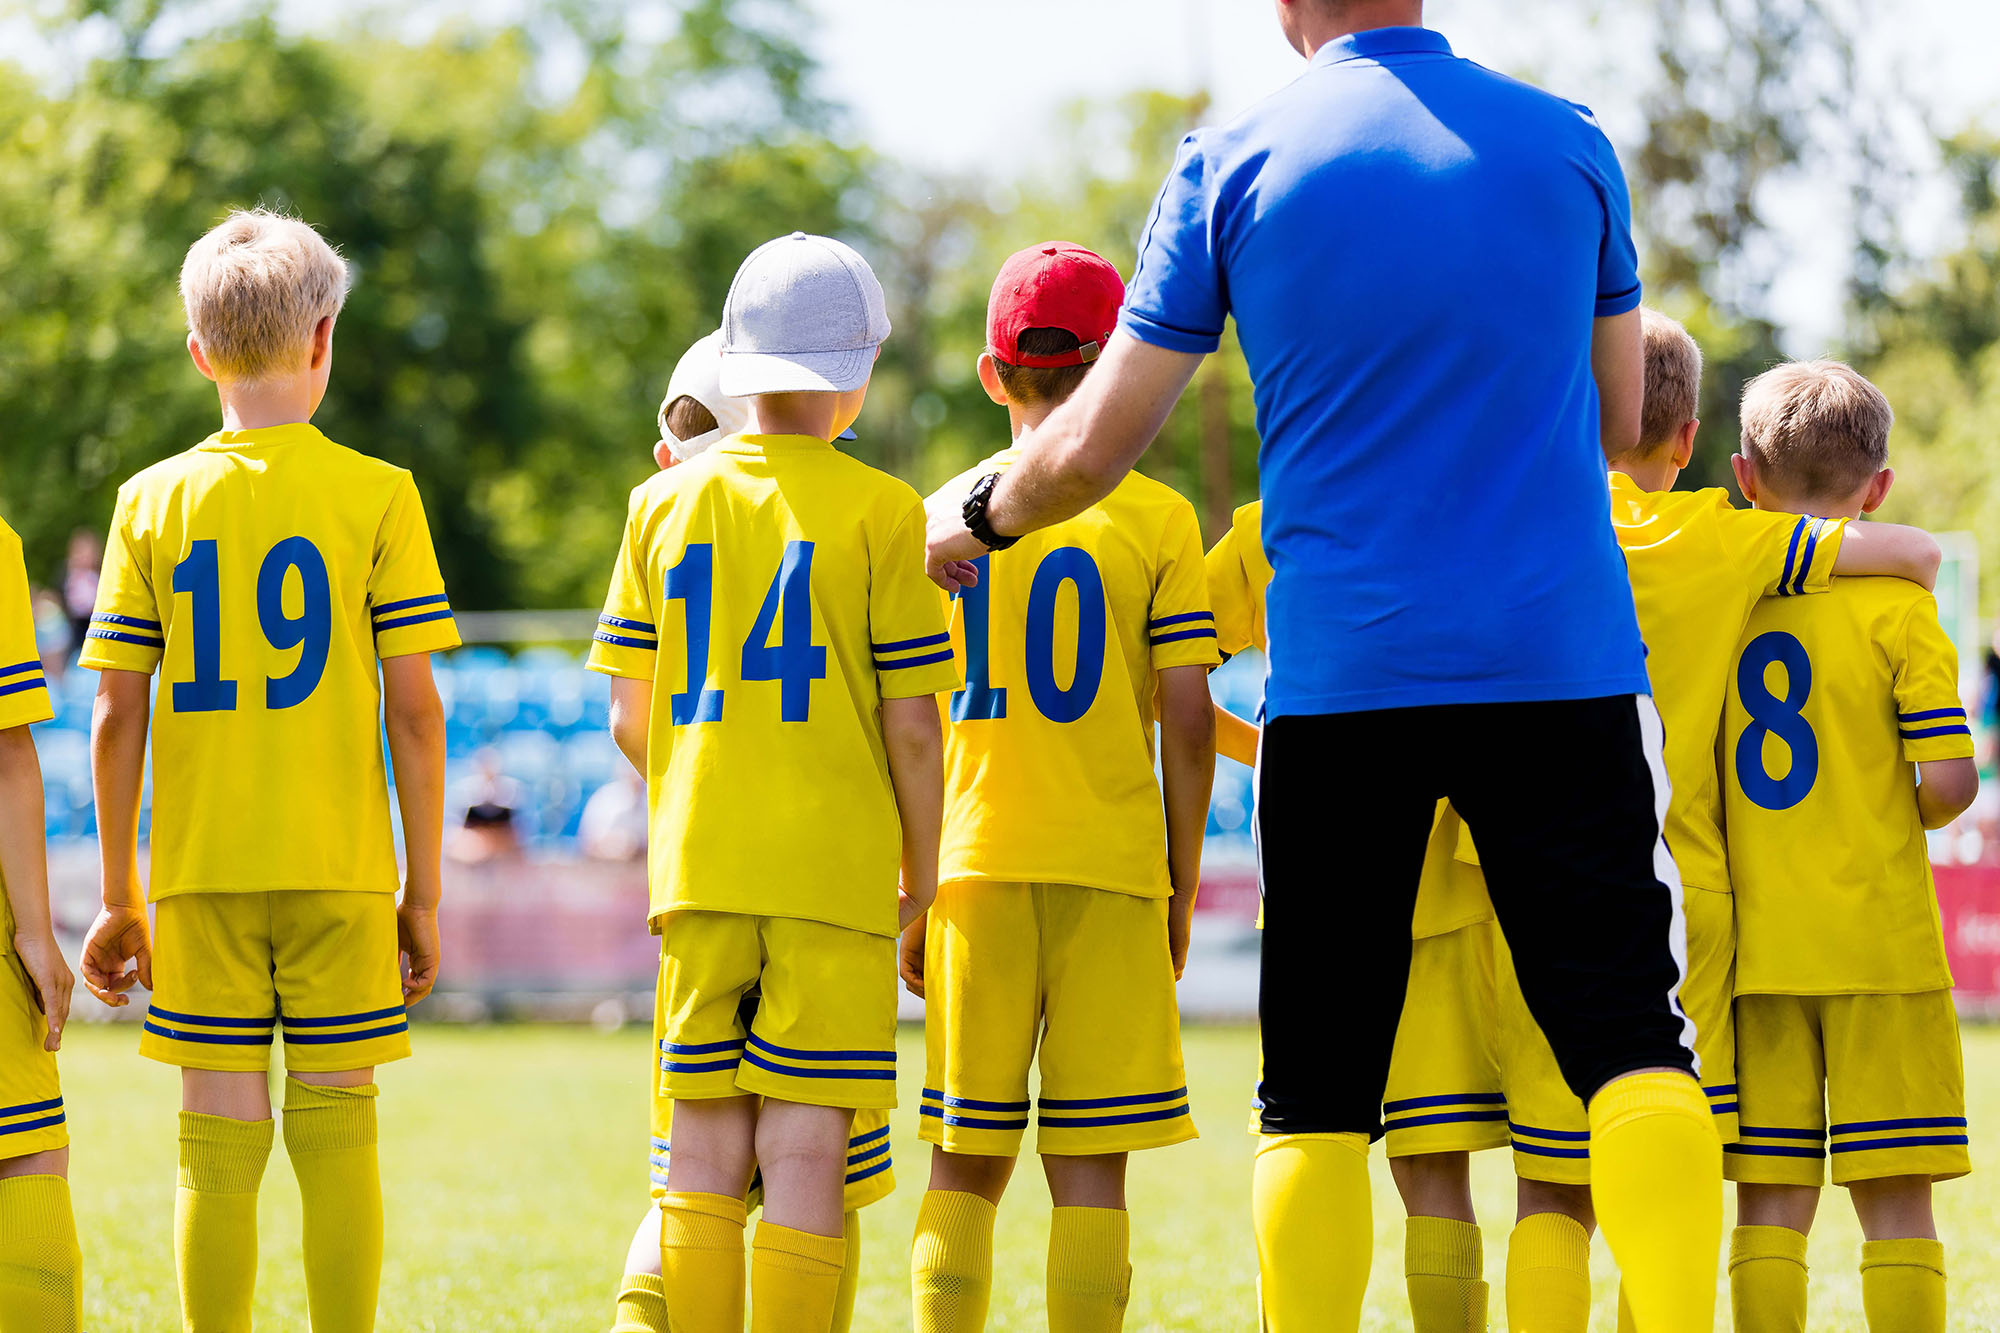 Why Are Sports Important for Children’s Development?